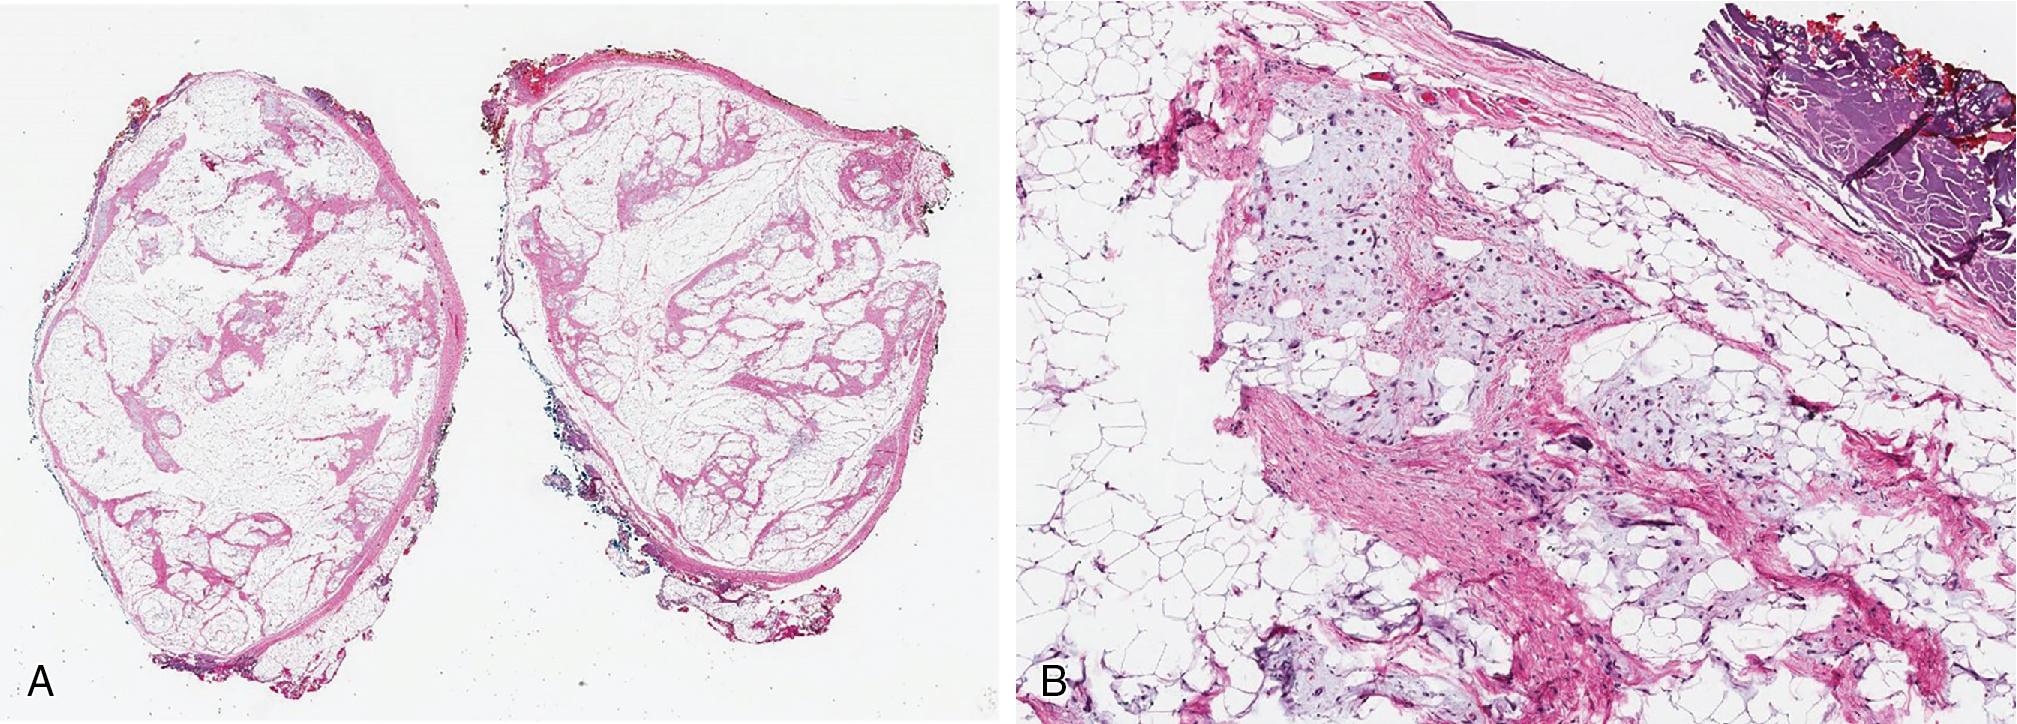 Fig. 8.5, Lipoblastoma is a well-circumscribed, lobulated adipocytic neoplasm with thick fibrous septa (A) composed of variably mature adipocytes intermixed with less mature cells and variably myxoid stroma (B) . The latter appearance can mimic myxoid liposarcoma.